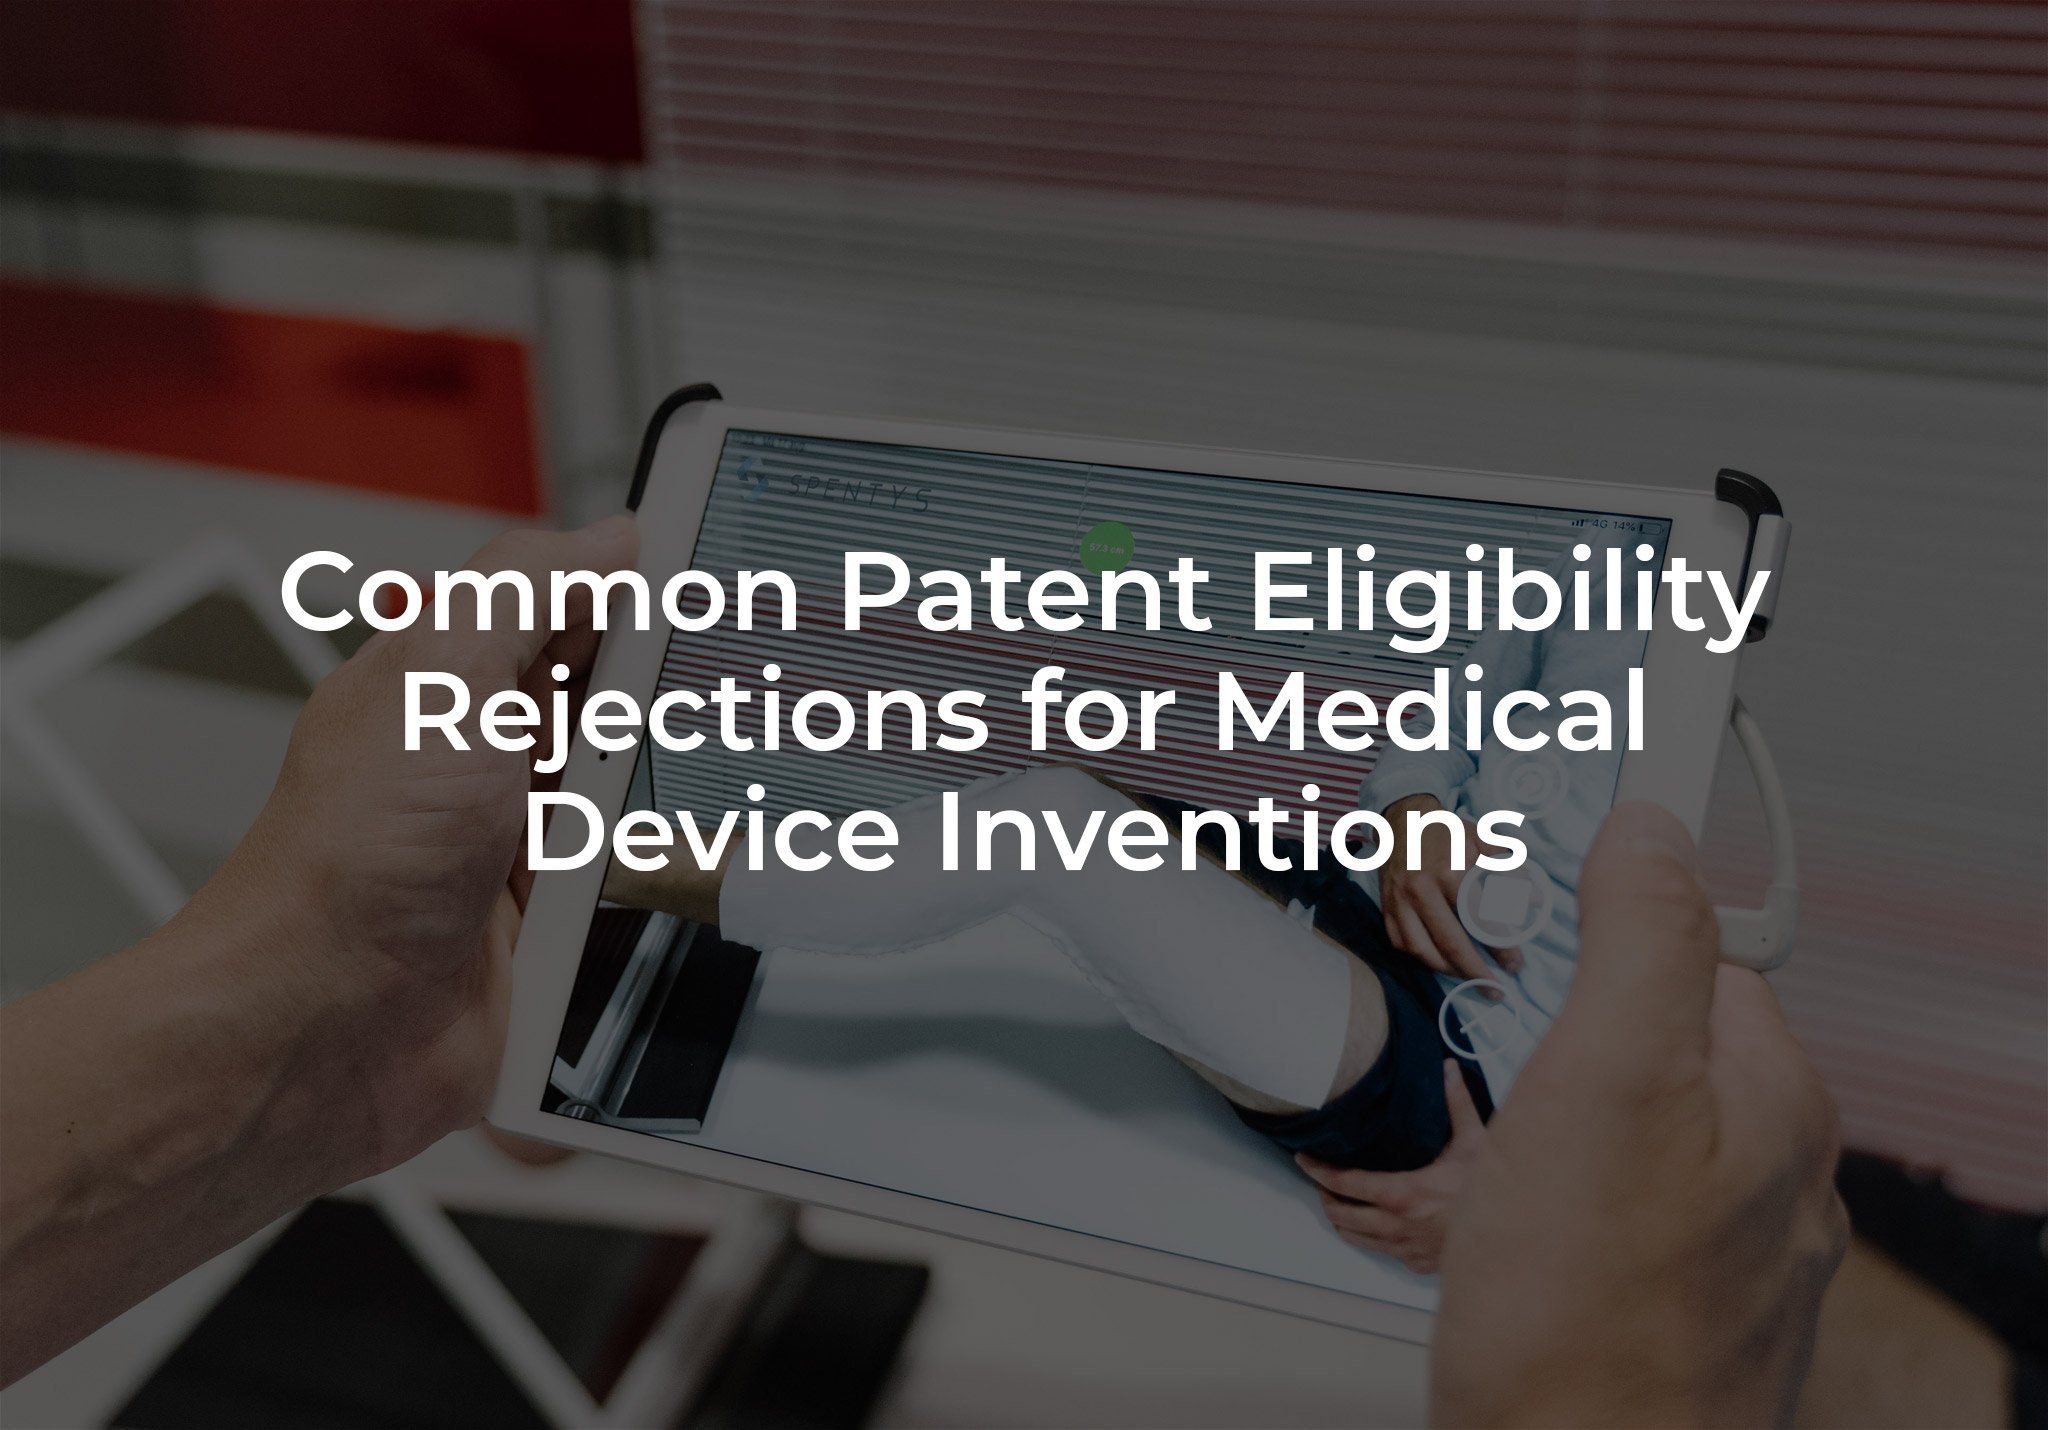 Common Patent Eligibility Rejections for Medical Device Inventions